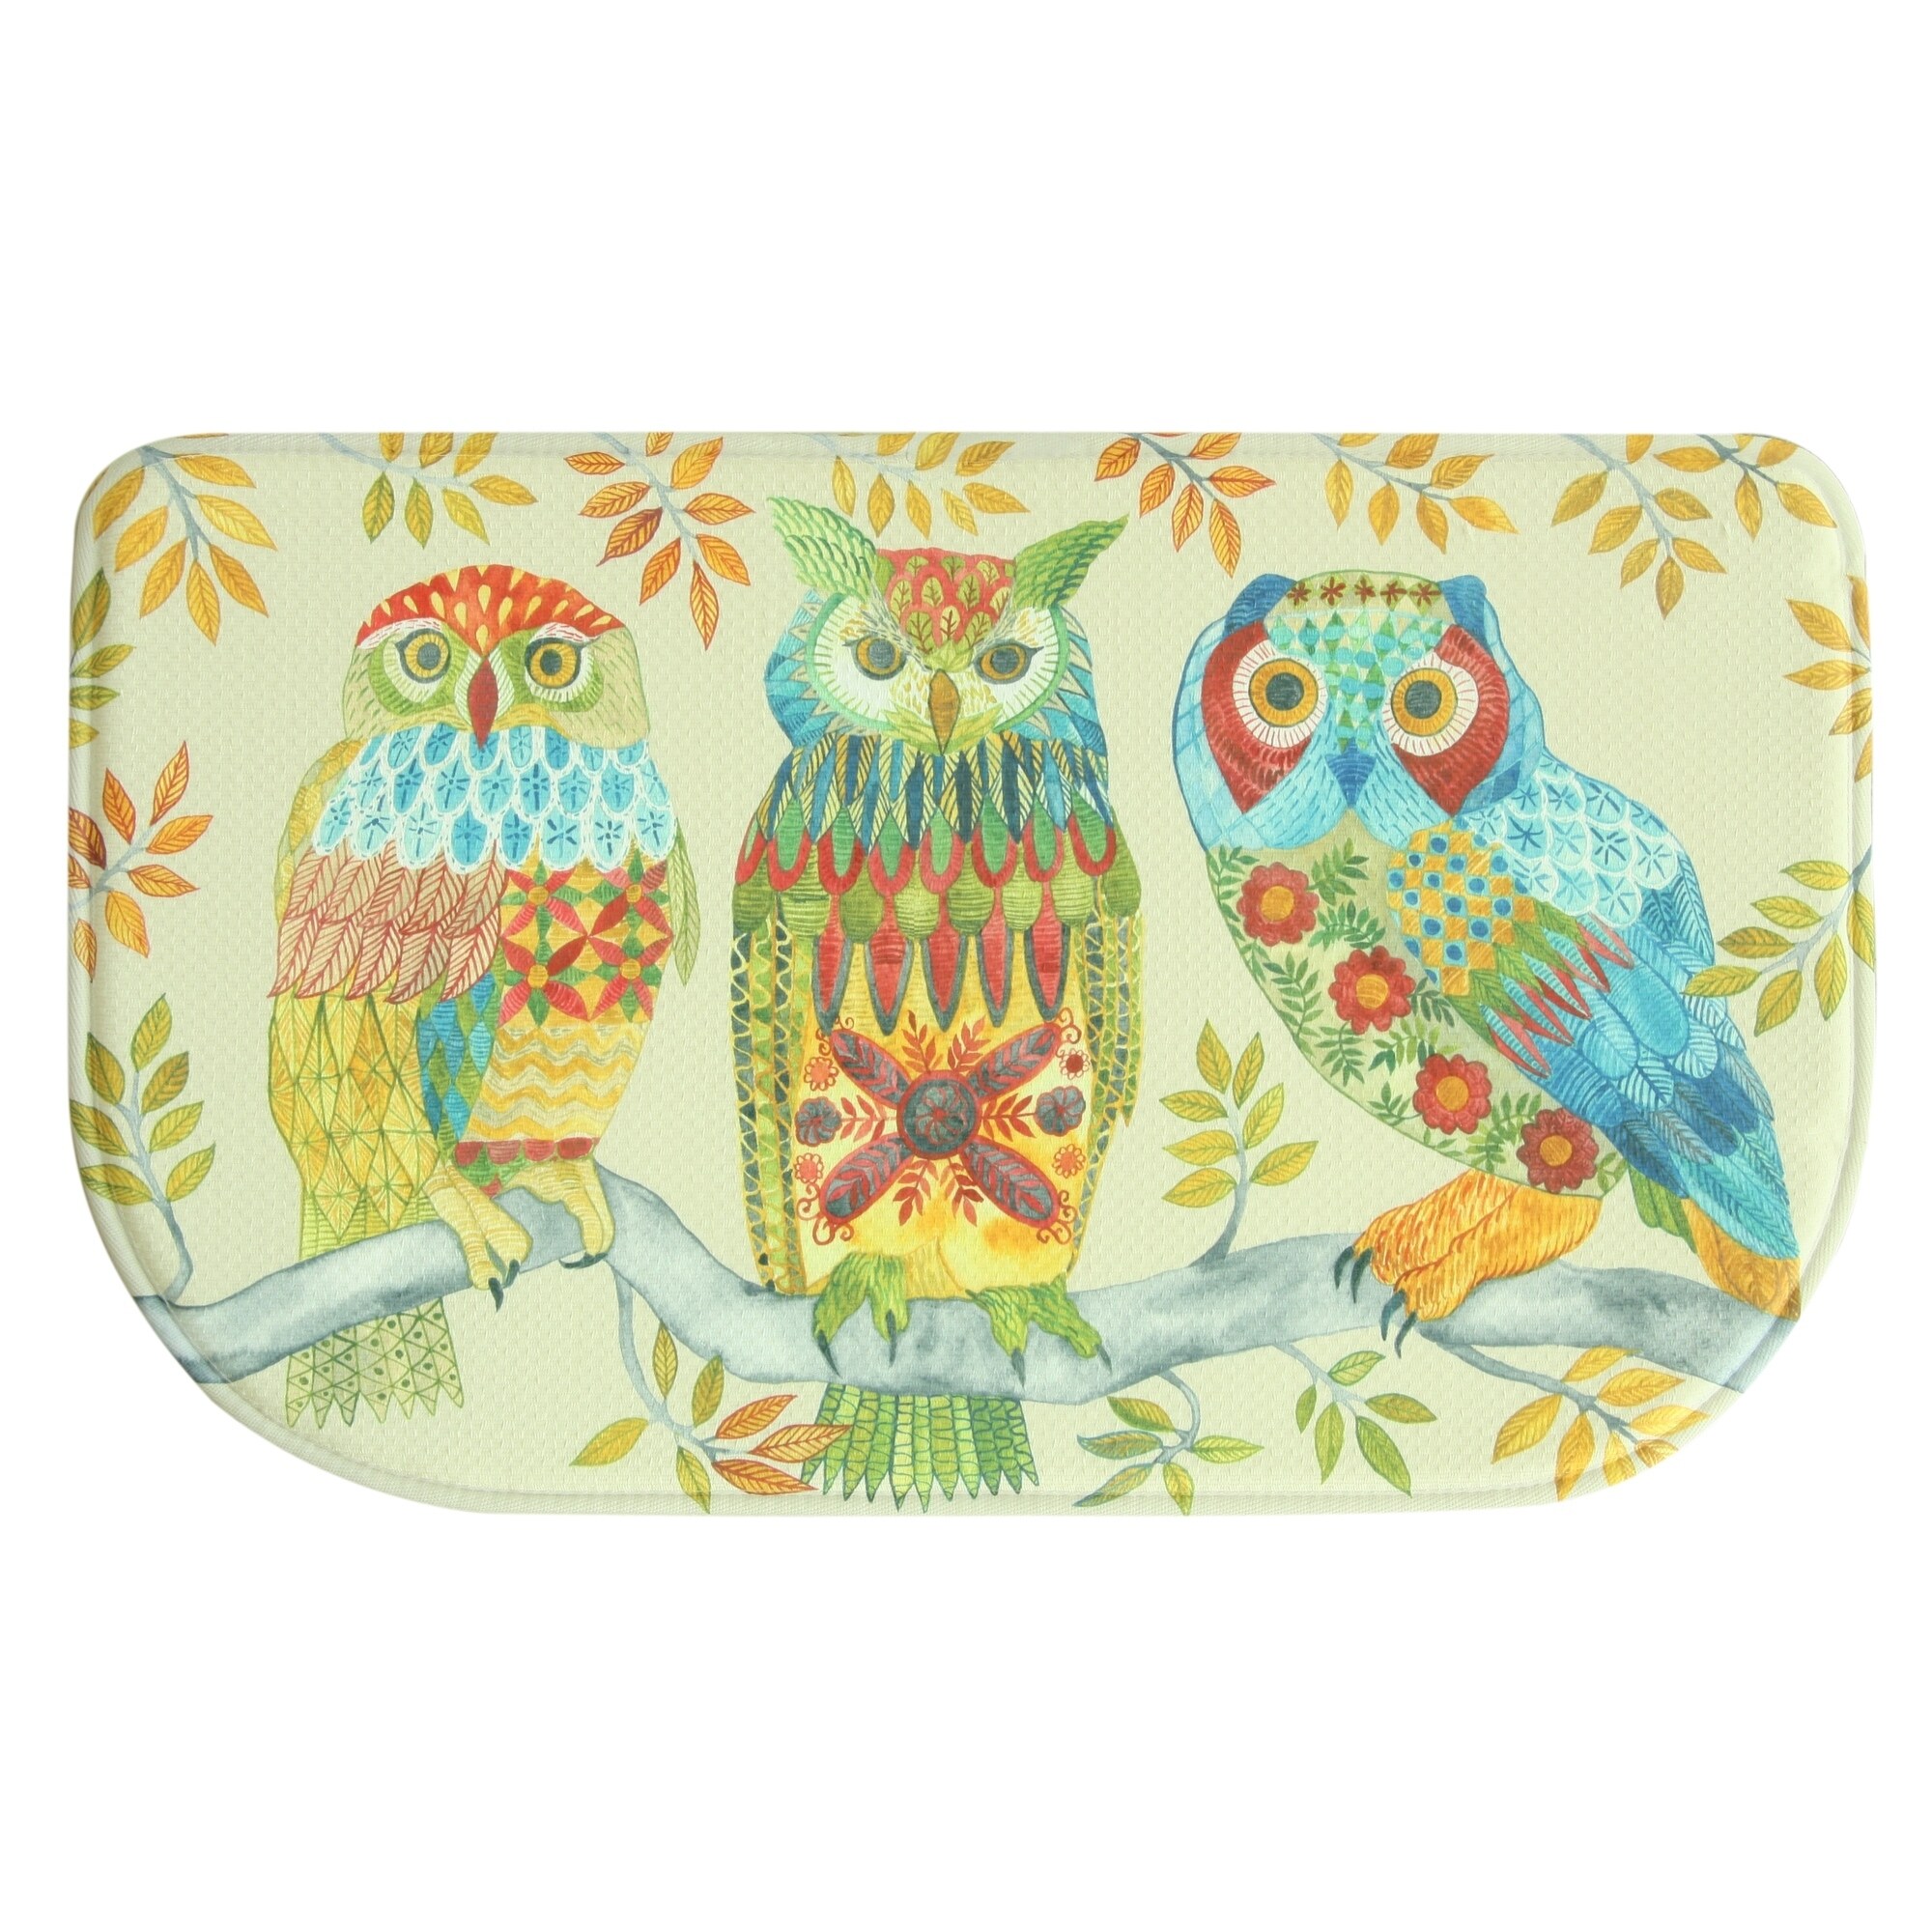 Owl Kitchen Rugs Bryont Blog 